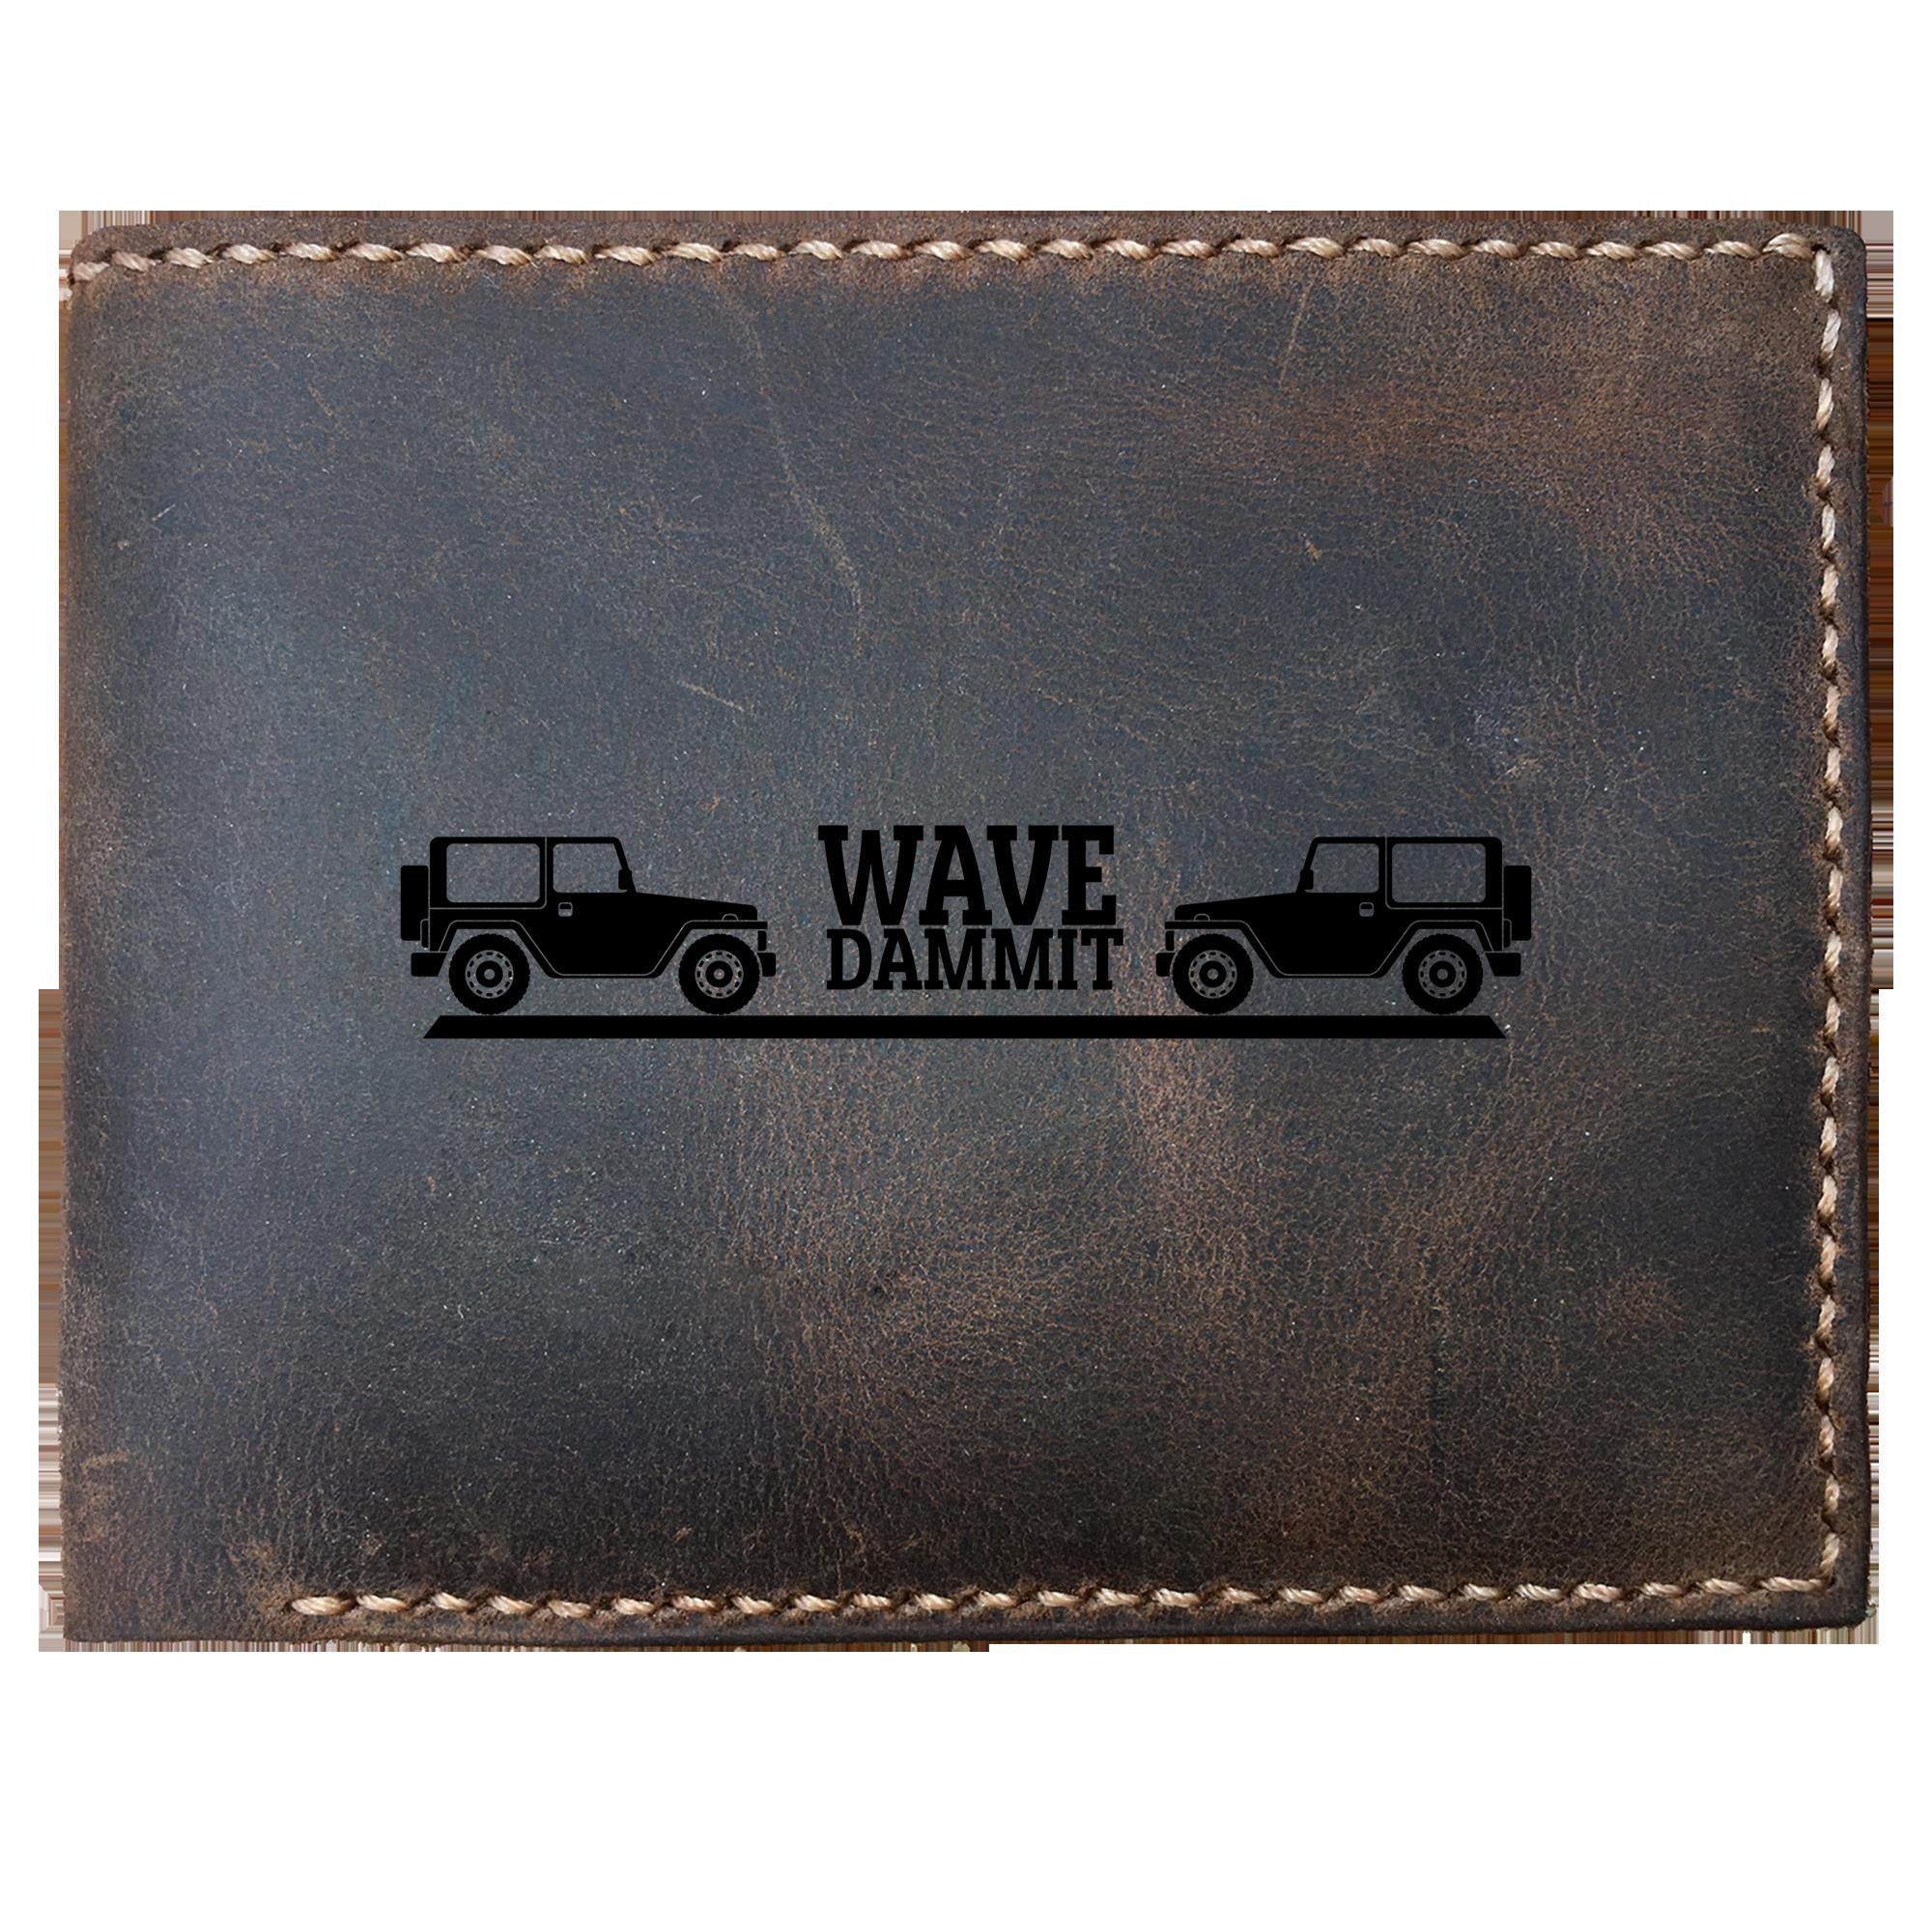 Skitongifts Funny Custom Laser Engraved Bifold Leather Wallet For Men, Wave Dammit